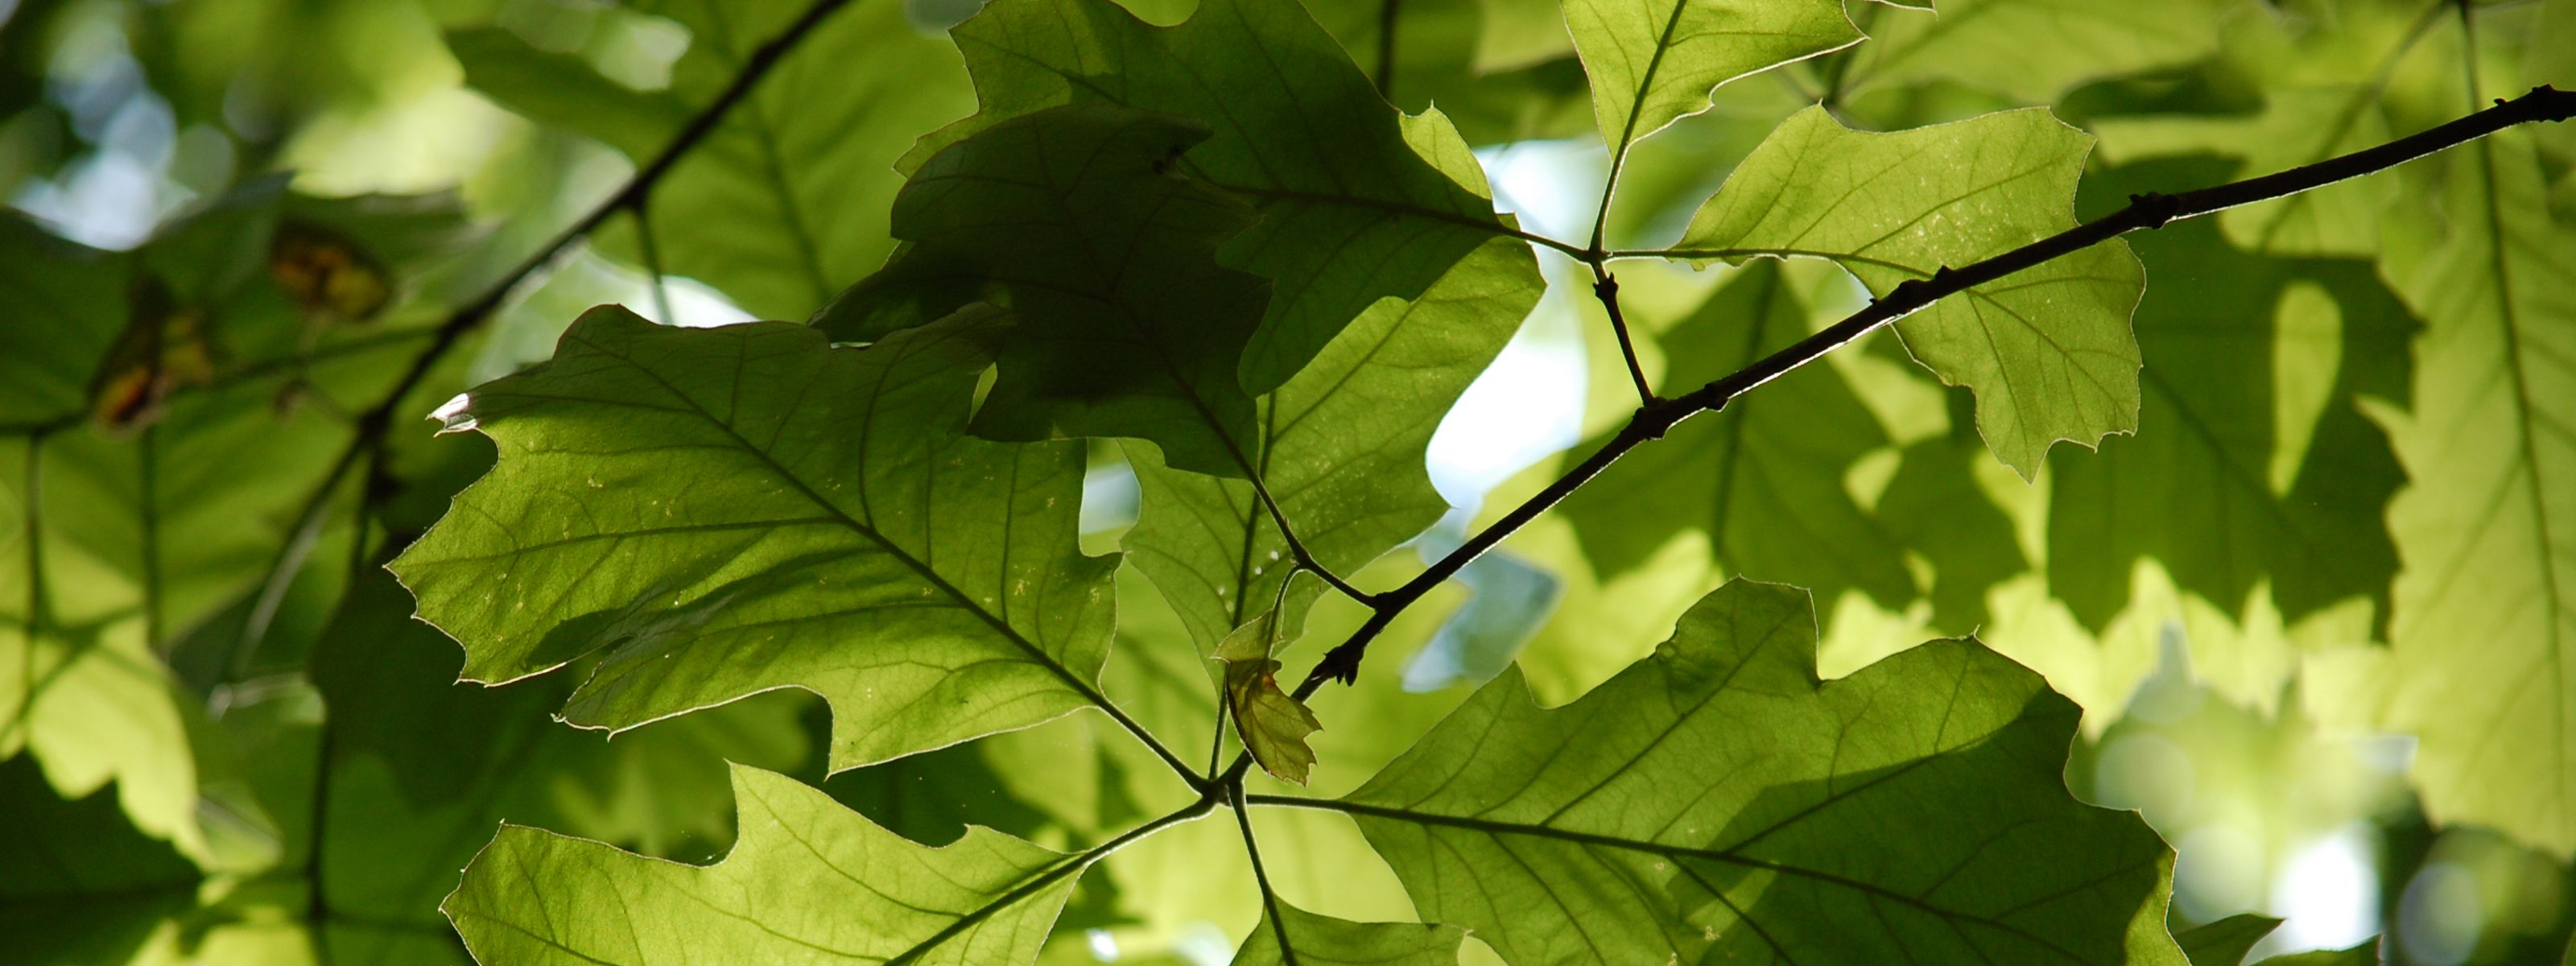 Several large oak leaves on a branch are backlight by the sun